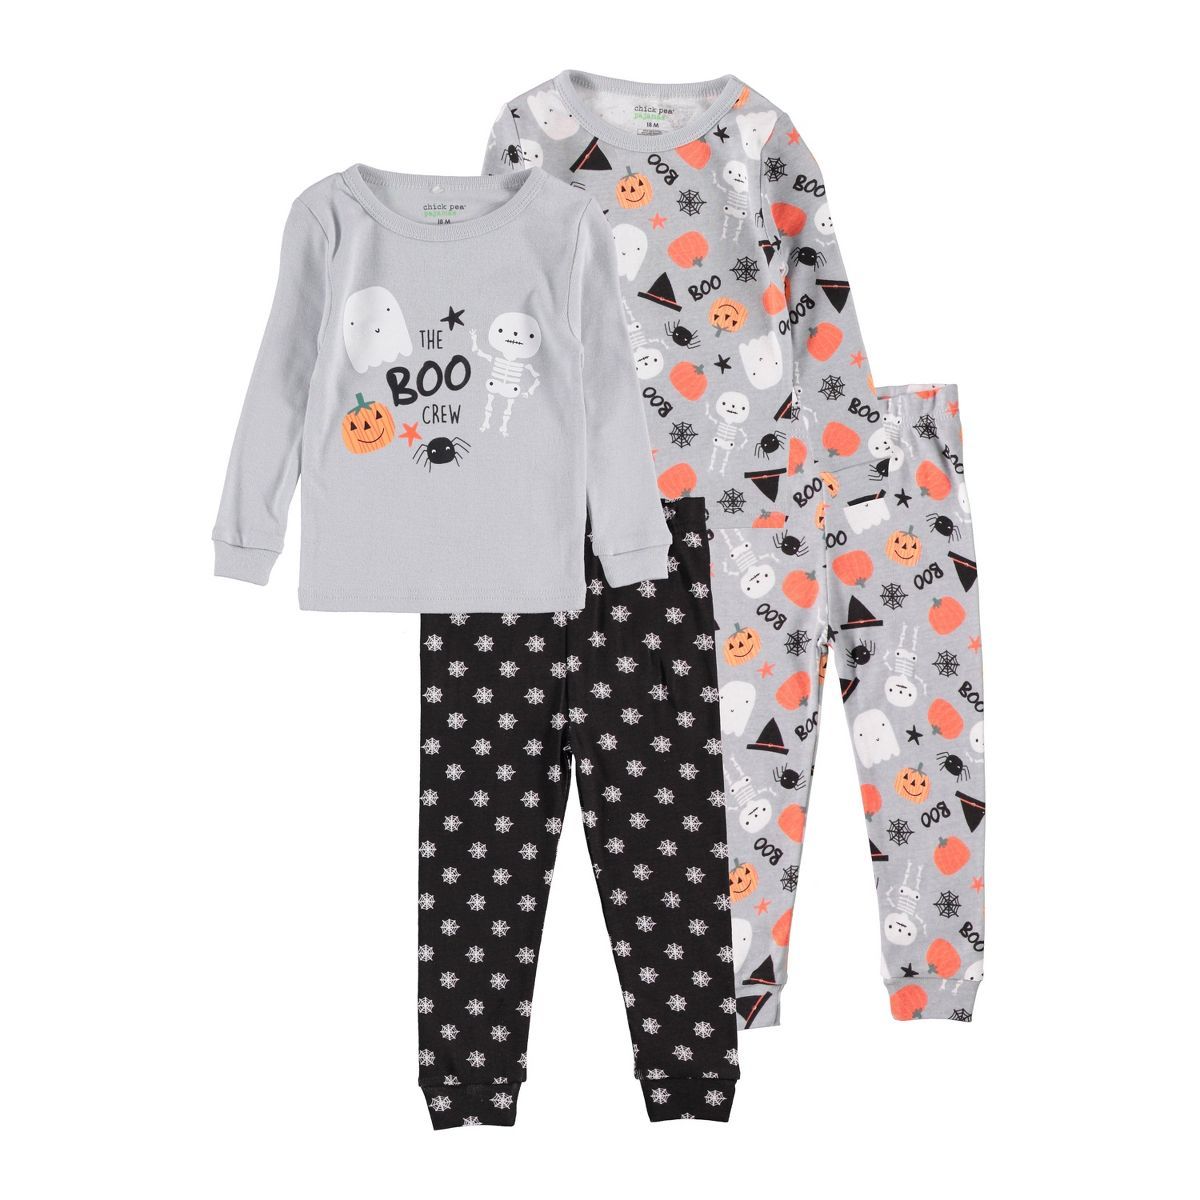 Chick Pea Baby Gender Neutral Baby Clothes for Newborn Cute Layette Jogger Sets | Target